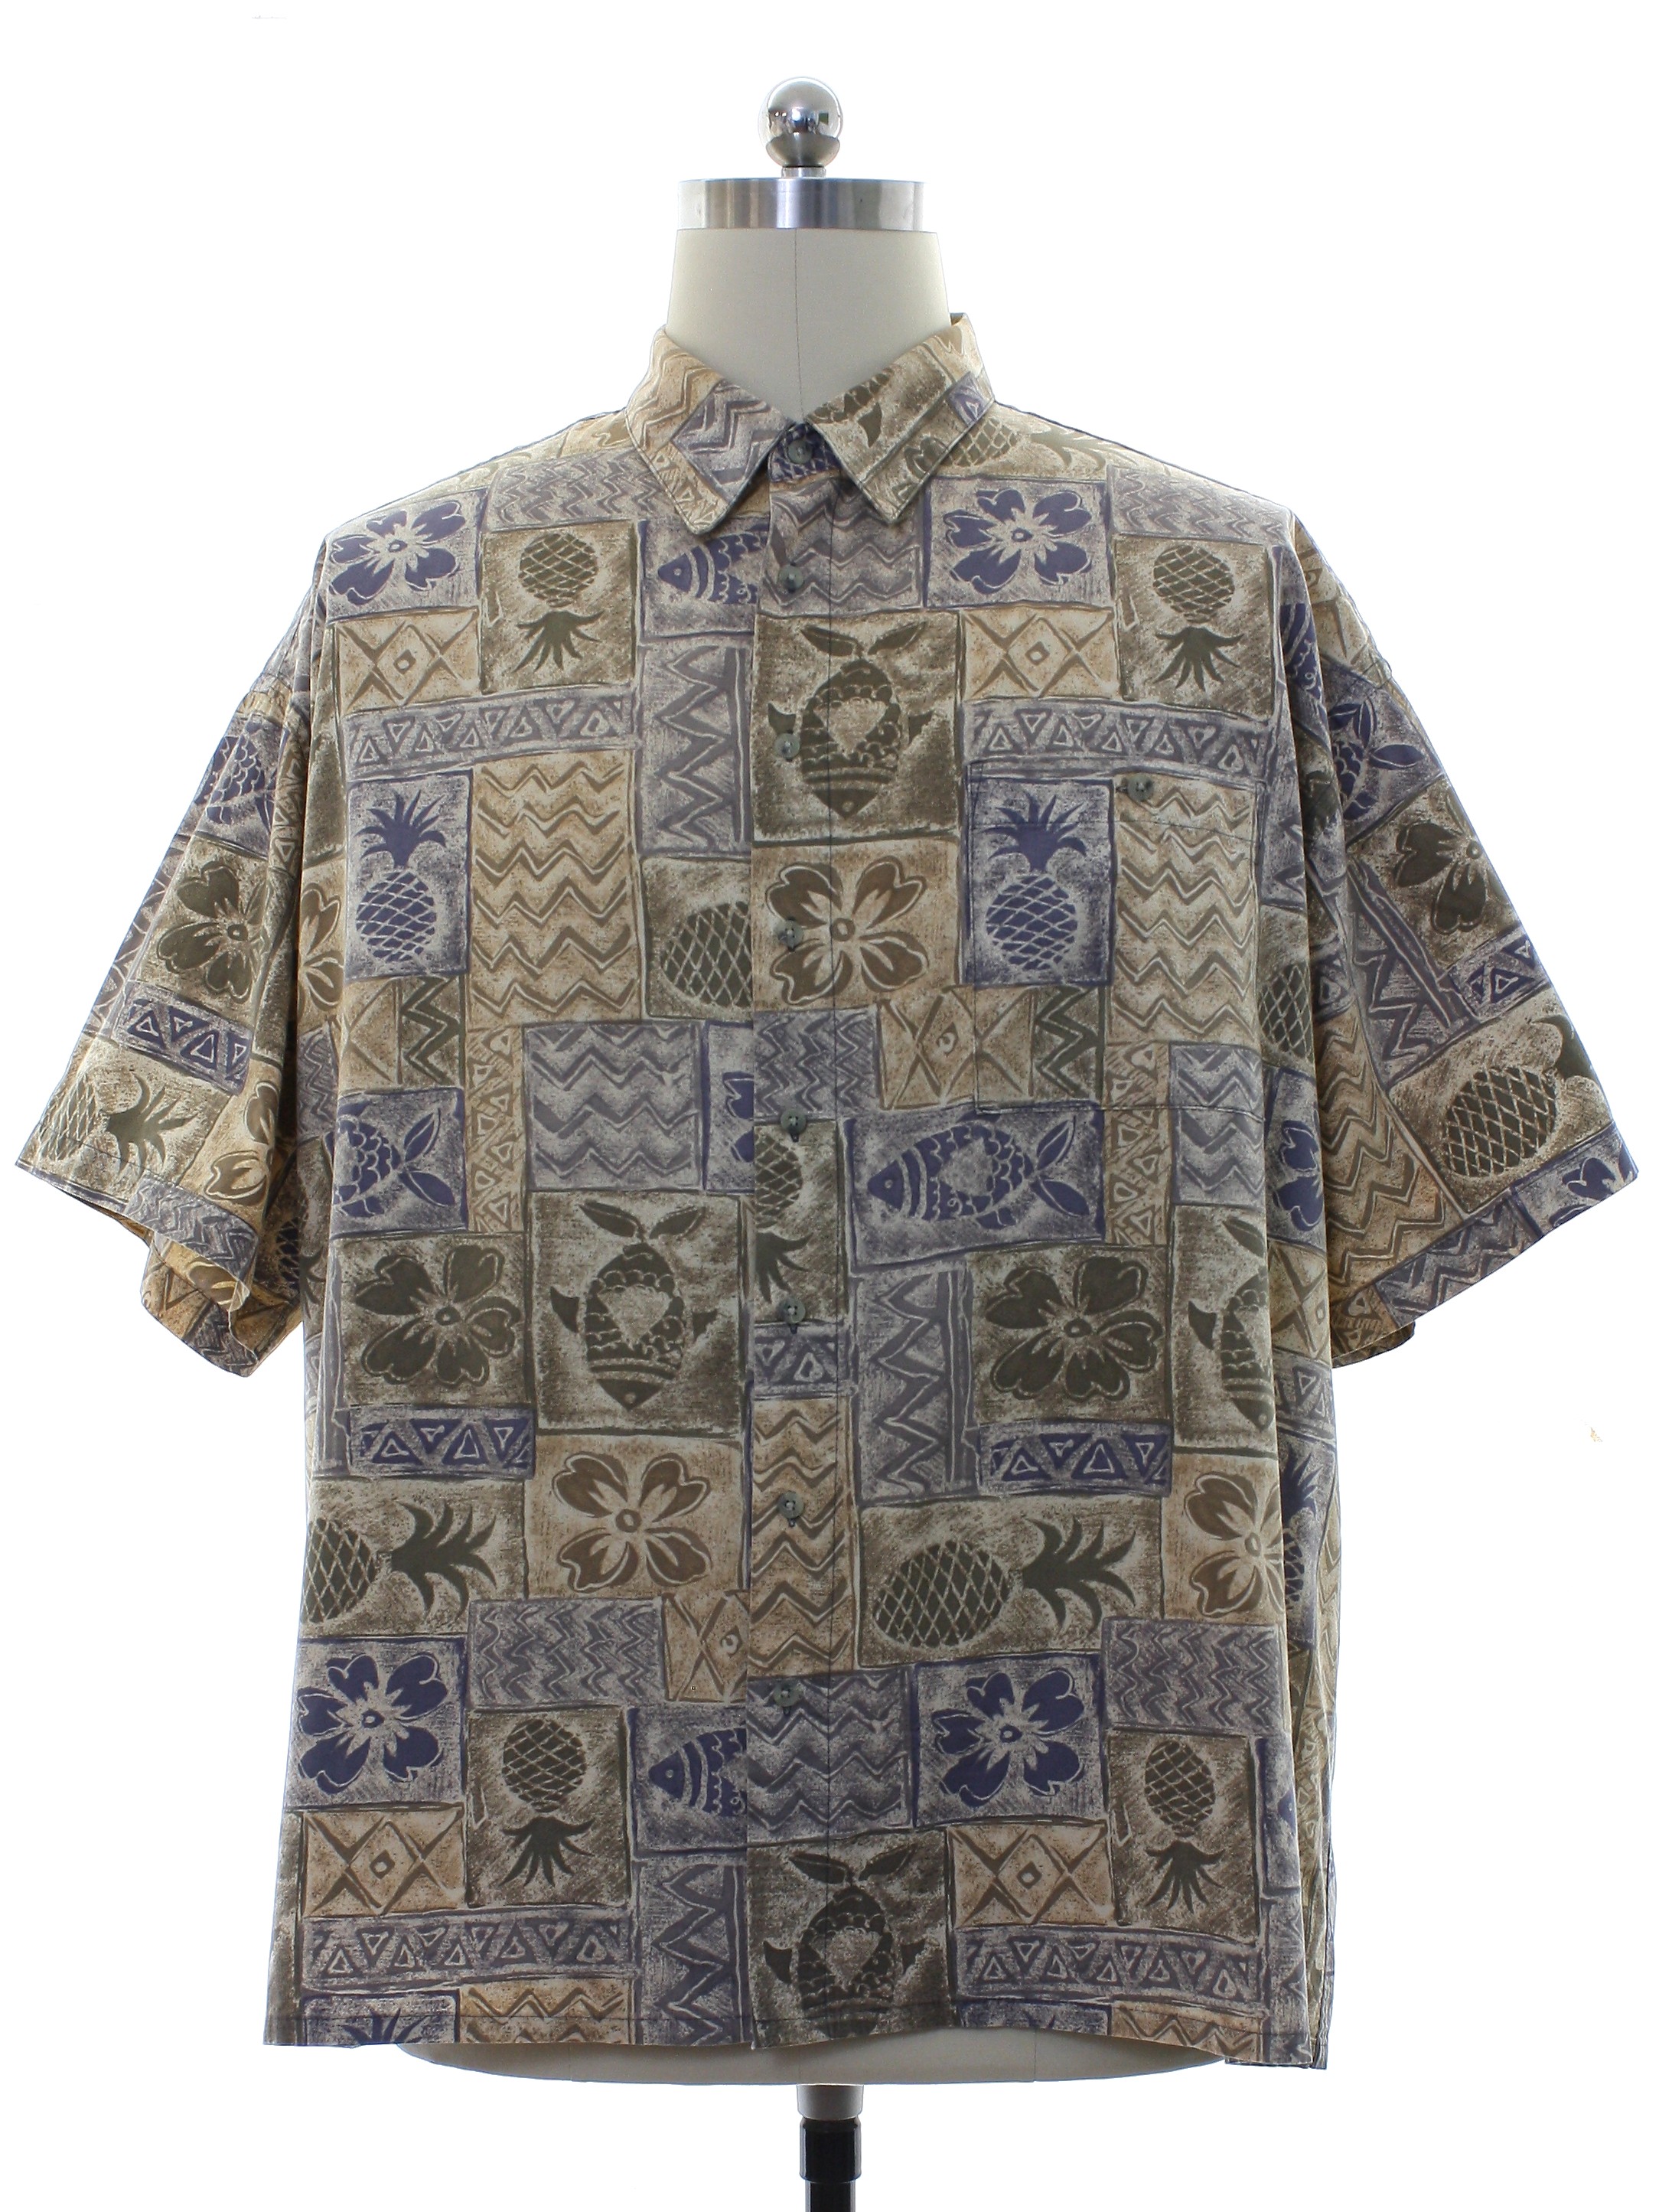 Nineties Vintage Shirt: 90s -Campia Moda- Mens background polyester cotton blend sleeve button up front print sport shirt with tapa cloth, floral, pineapple and fish motifs in shades of